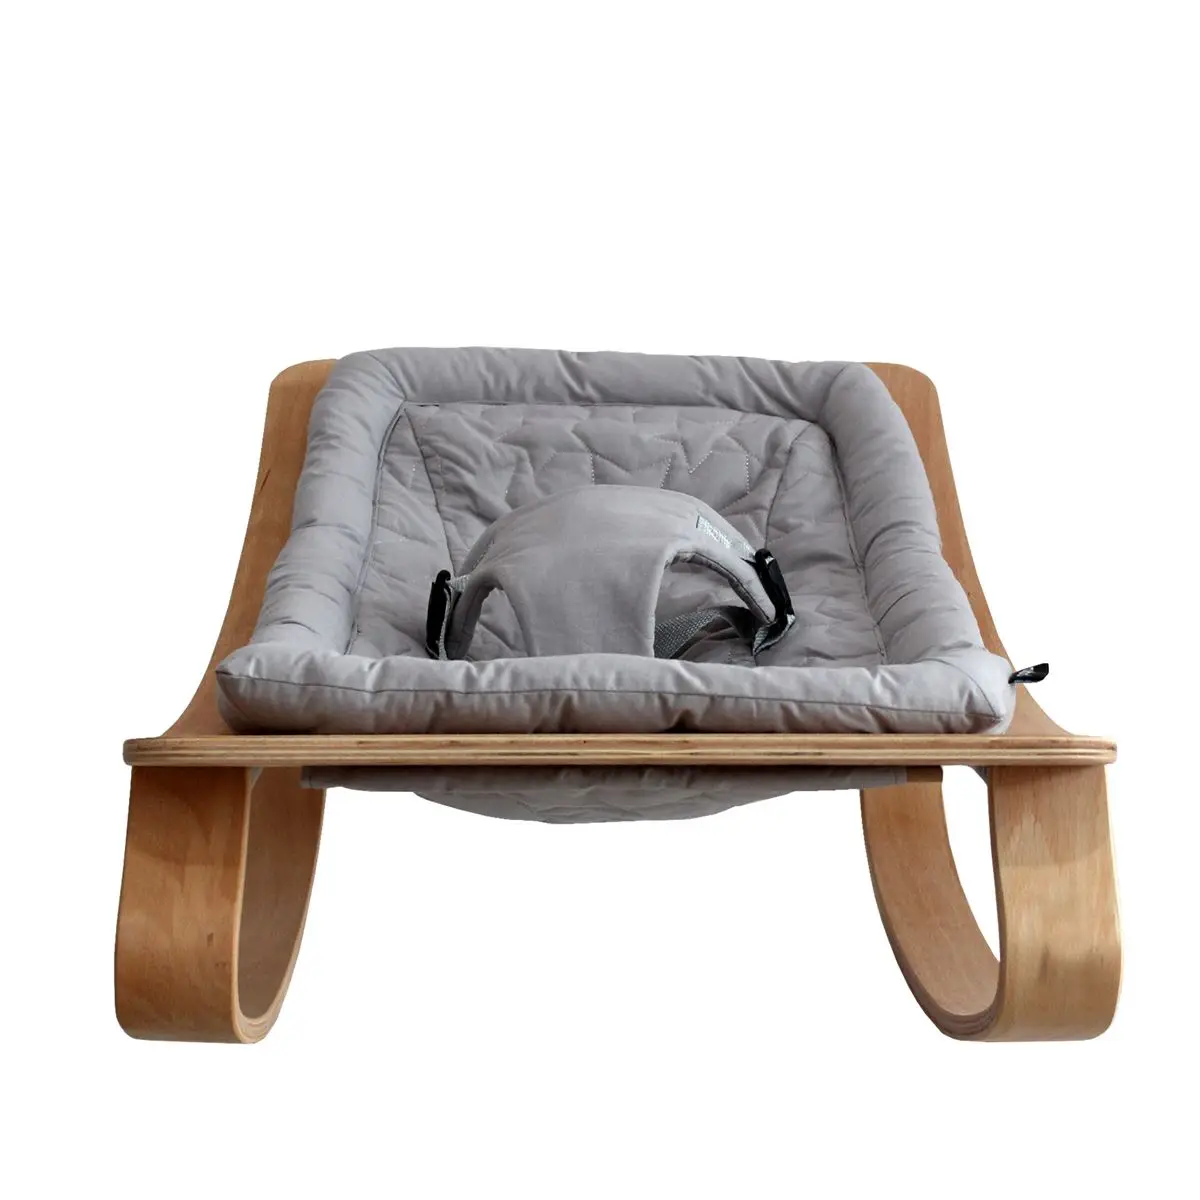 Turquality Natural Beech Tree Wooden Baby Rocker Crib Play Gym New Born Baby Clothes Bed Lit Bedstead Baby Swing Cradle Bouncer Hammock Baby Rocking Basket Sleeper Chair Nursery Room Furniture Infant Dropshipping images - 6